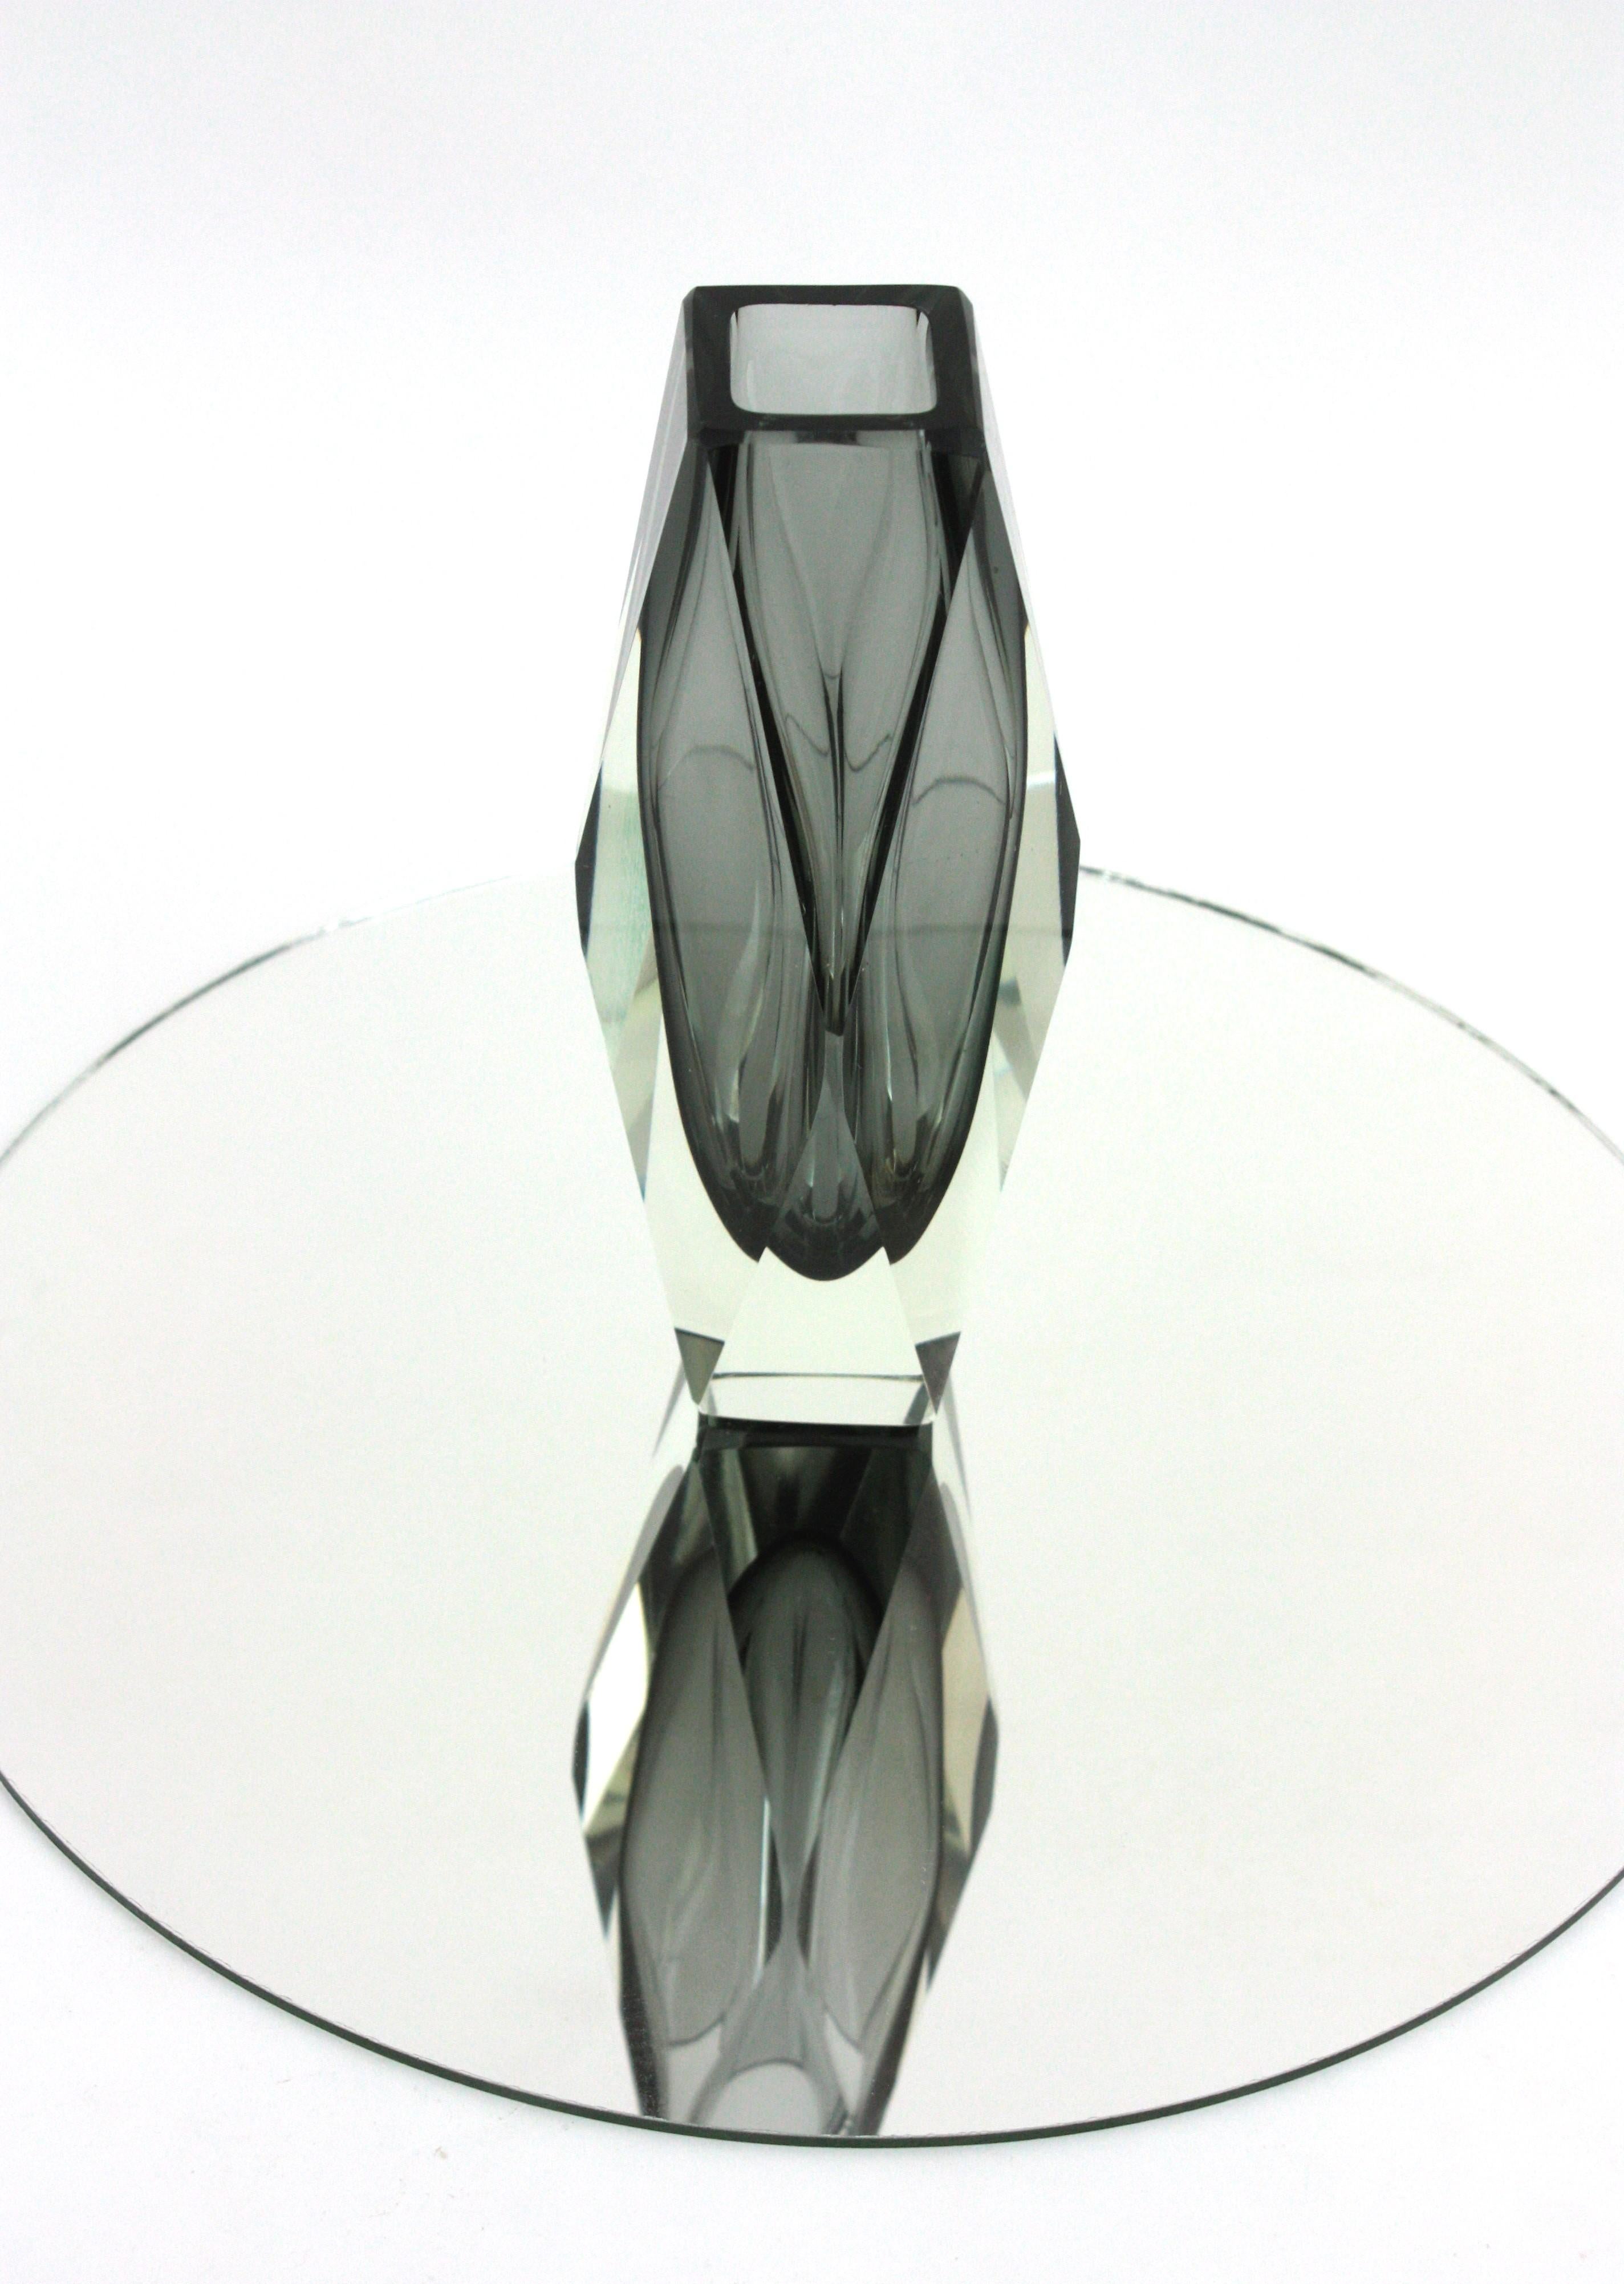 Mandruzzato Murano Sommerso Smoked Grey Clear Faceted Art Glass Vase For Sale 8